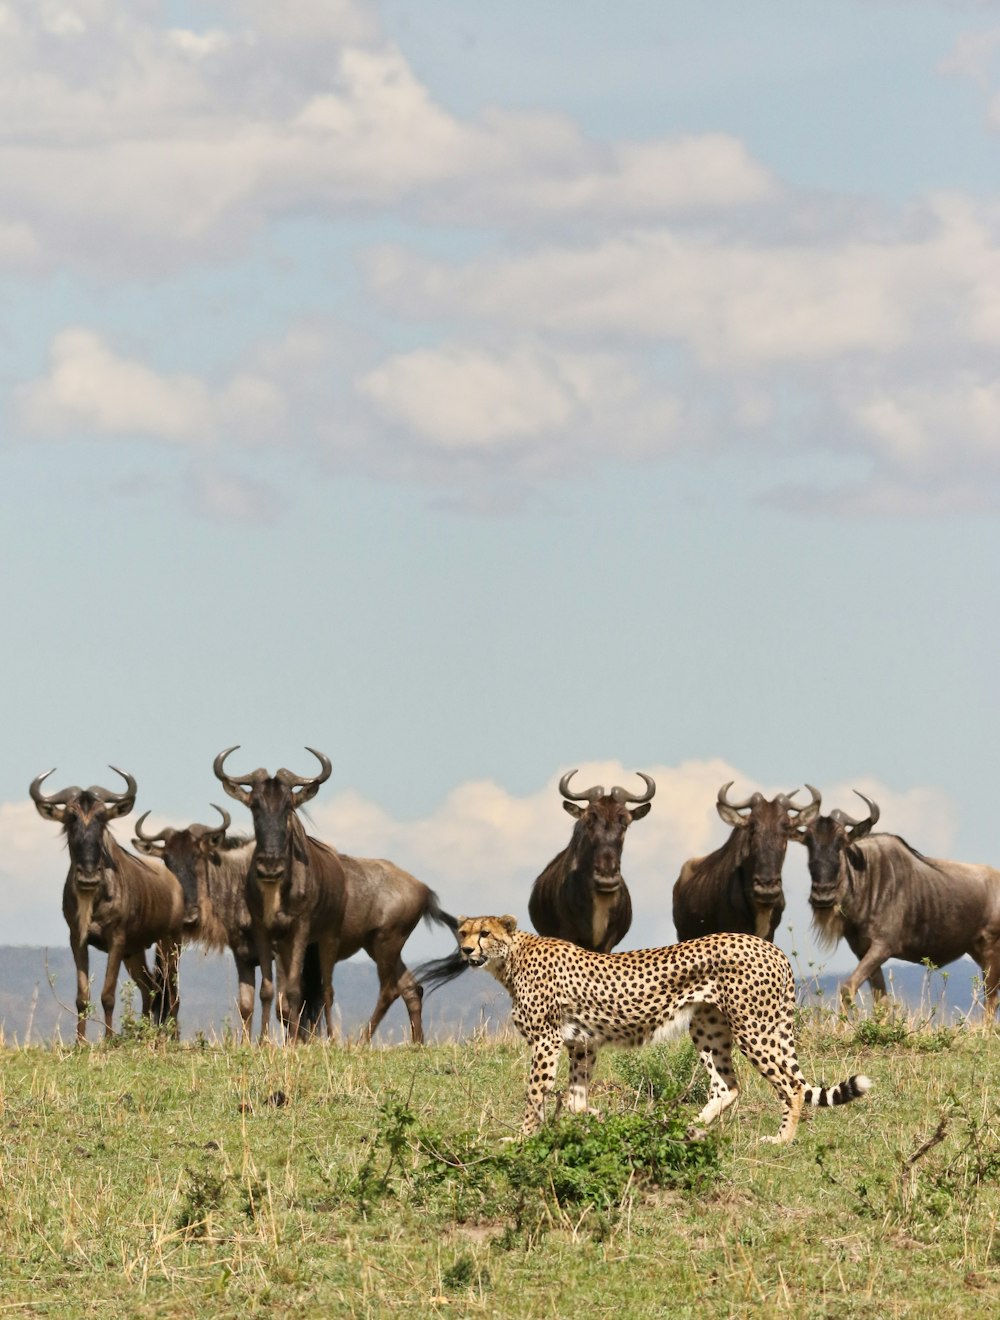 a cheetah and a herd of wildebeests on a grassy plain